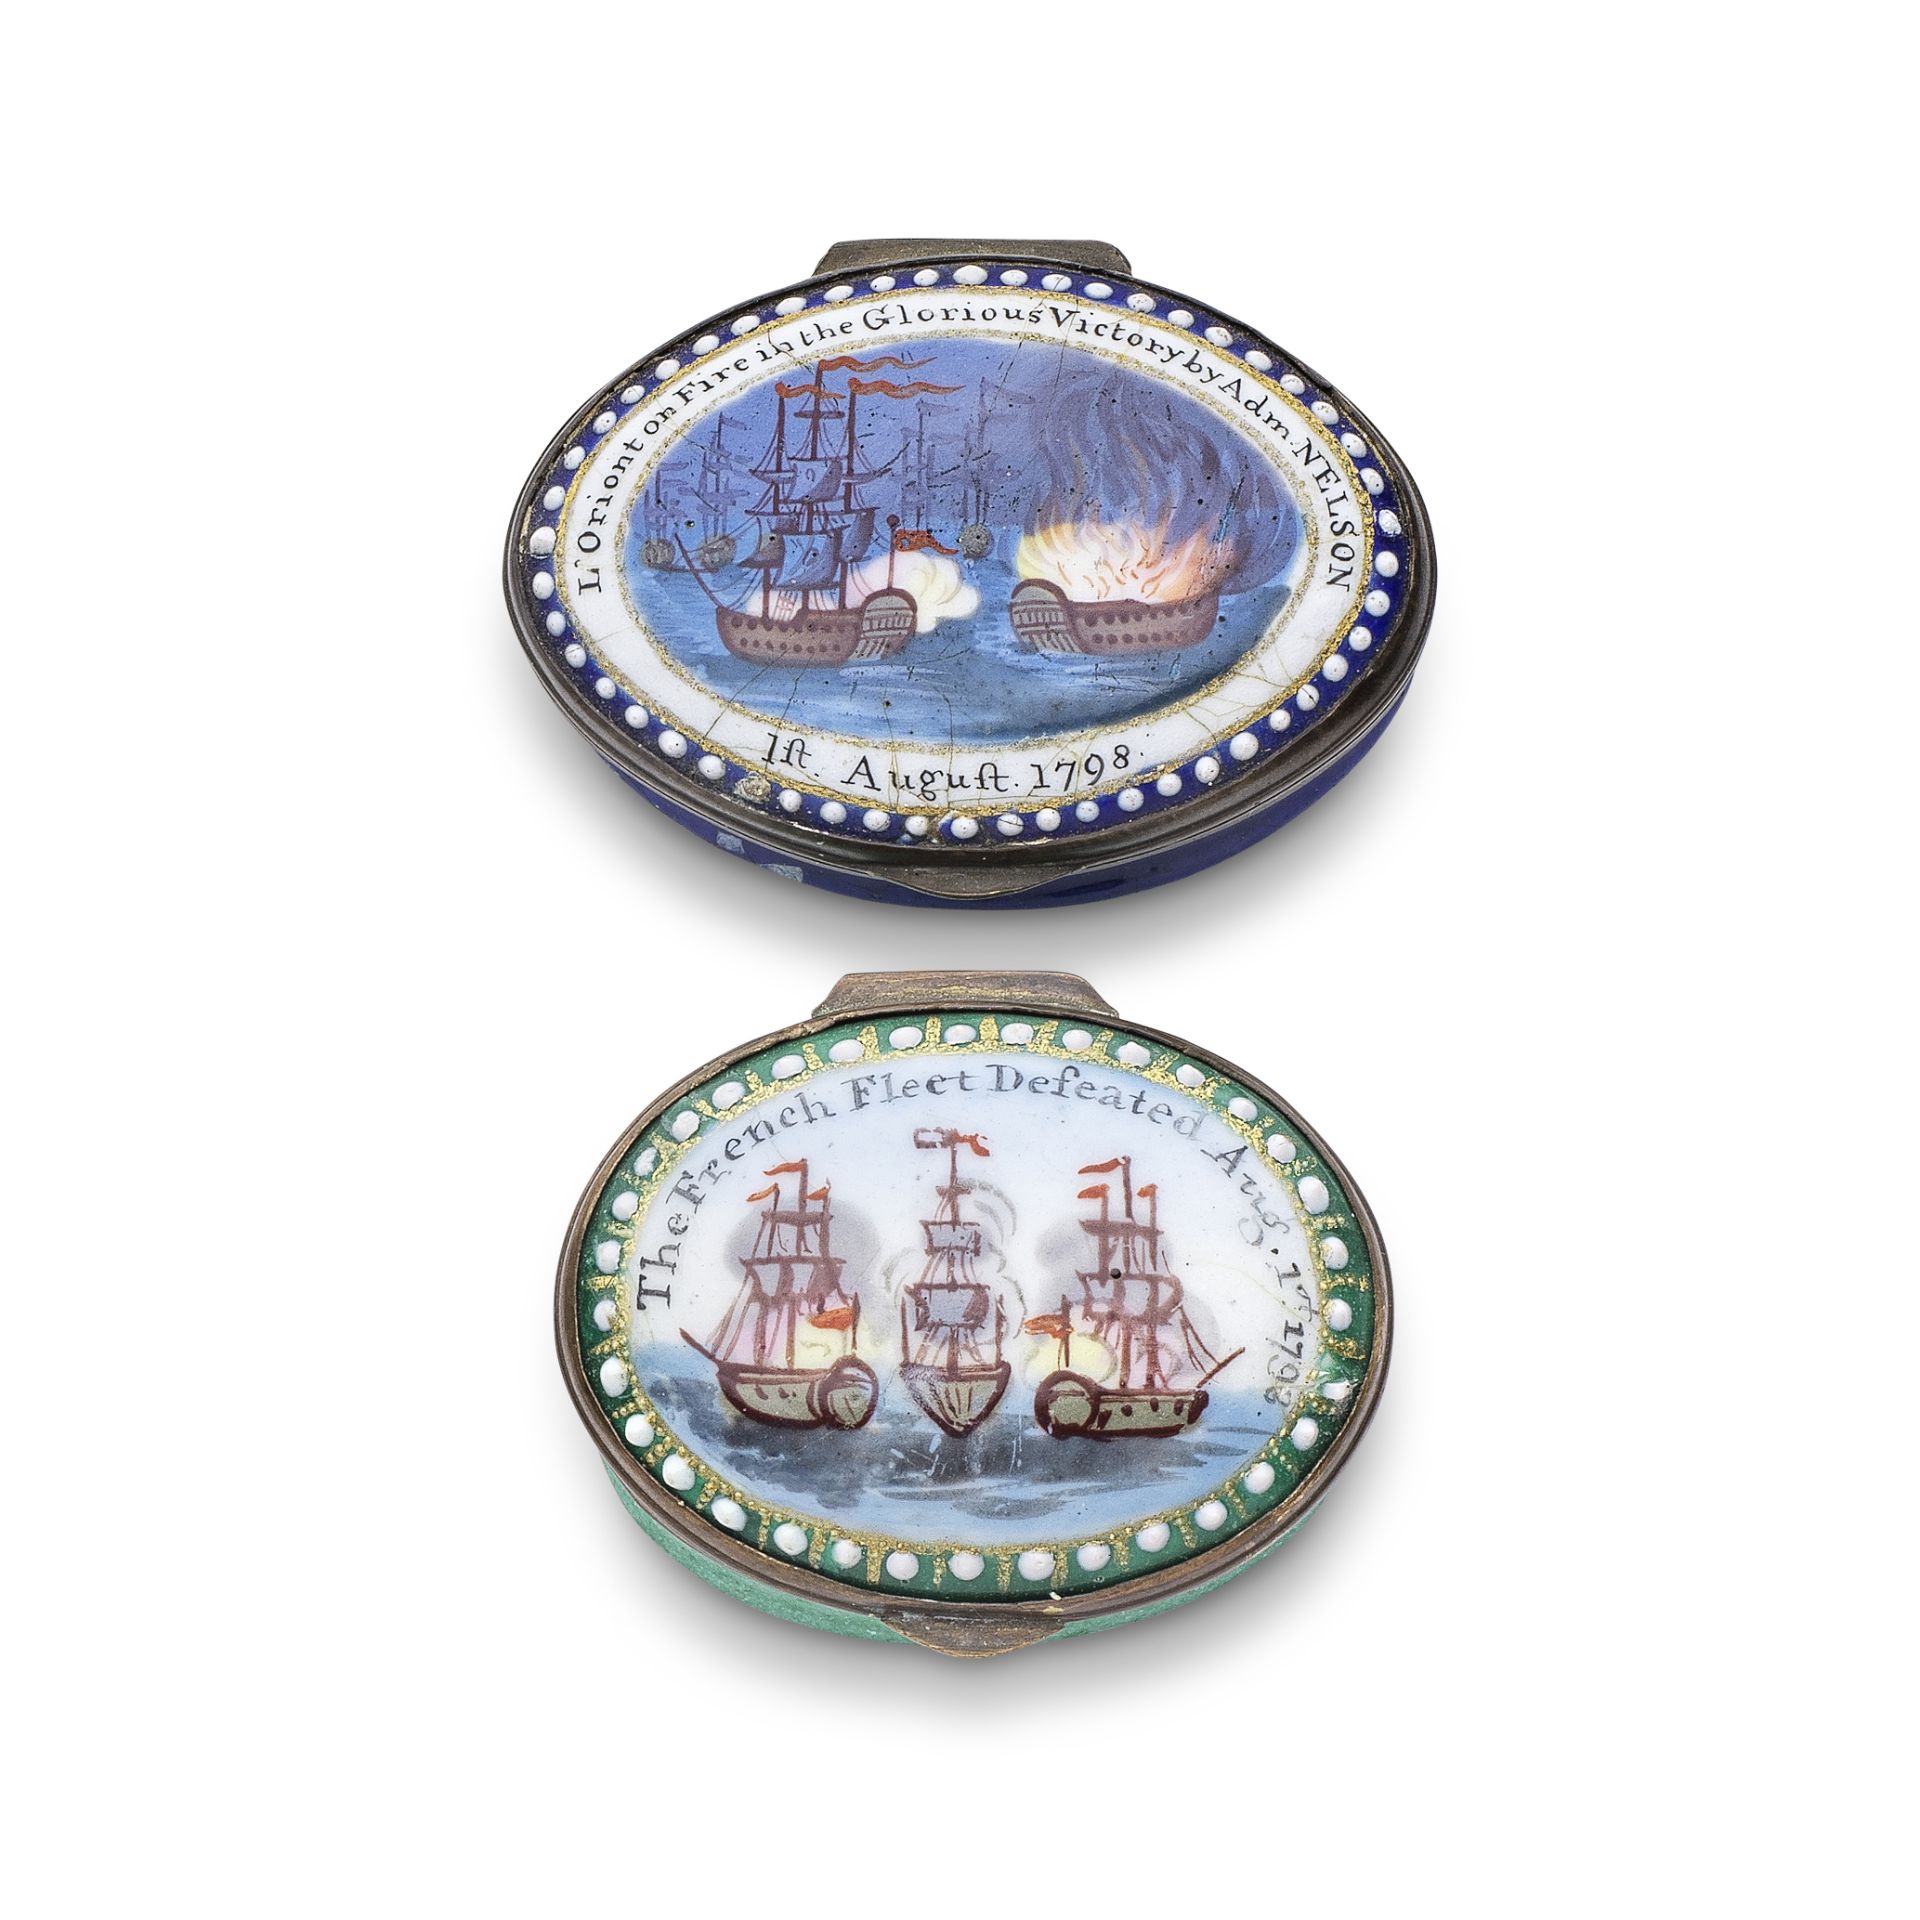 Battle of the Nile: Two South Staffordshire enamel patch boxes, circa 1800